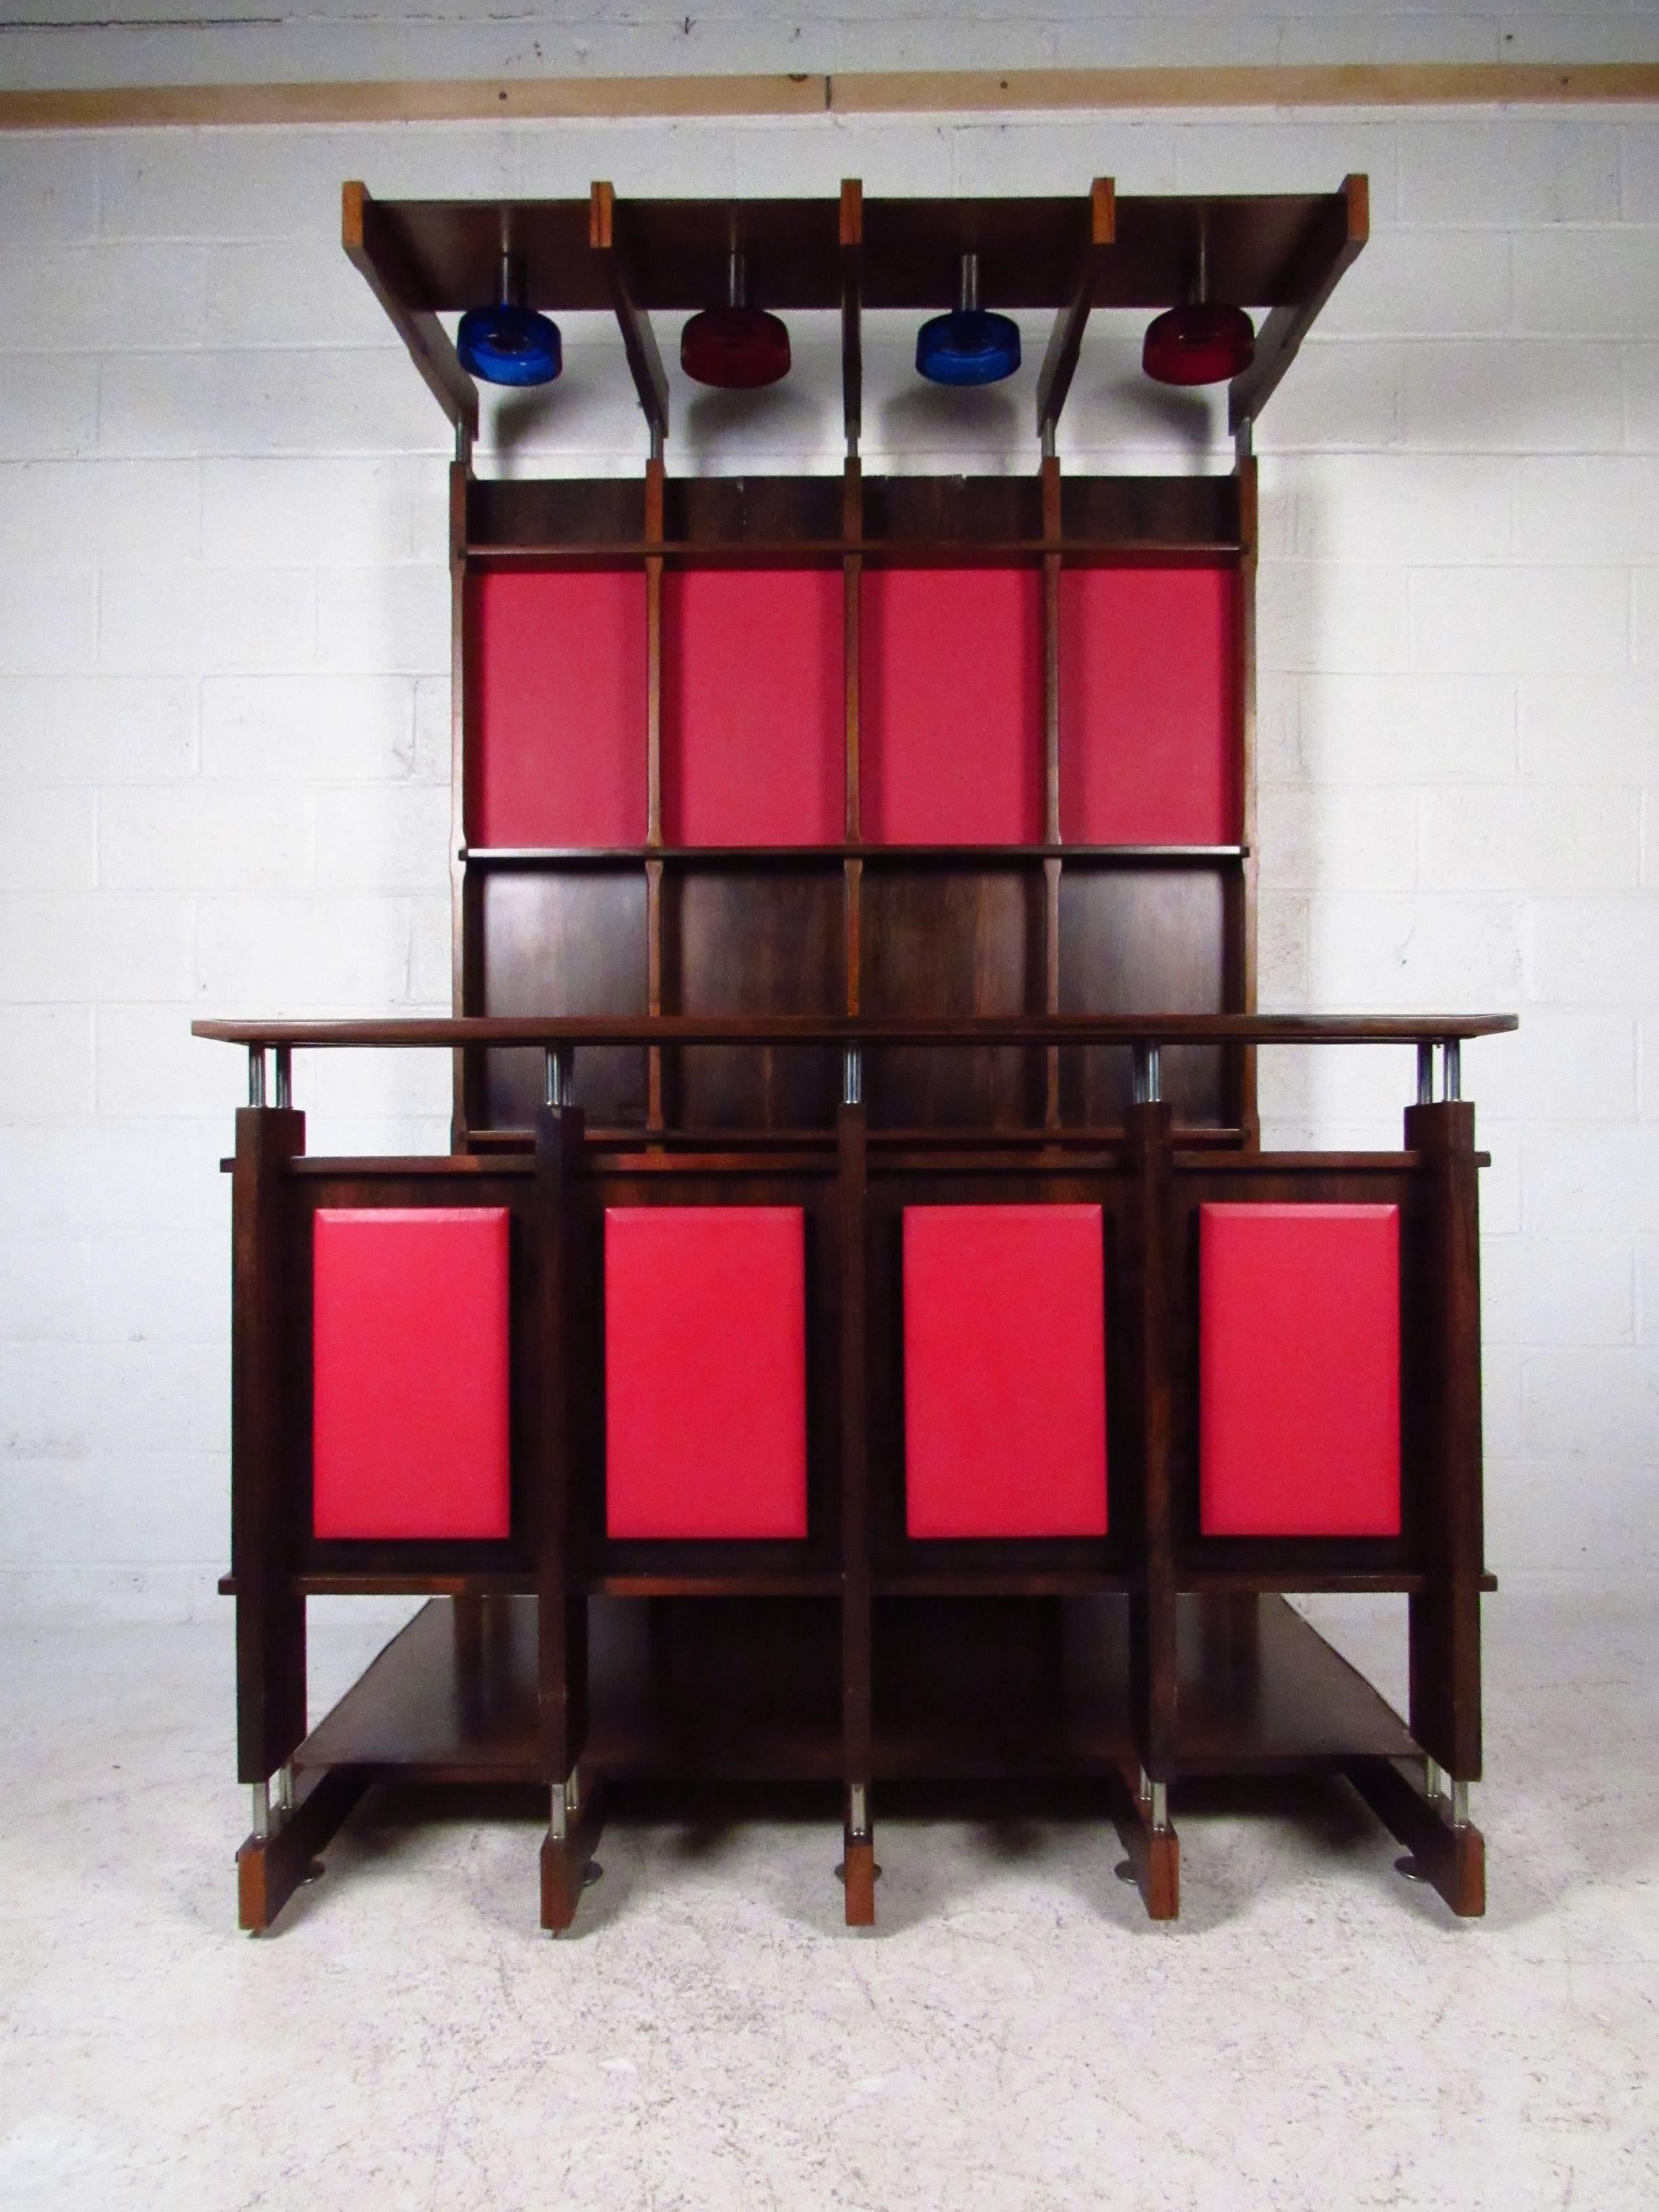 This gorgeous modular bar unit offers a beautiful mix of rosewood and colored paneling, with unique metal accents, and fantastic overhead lighting. Truly impressive piece makes a wonderful addition to any interior, and included floating bar top,